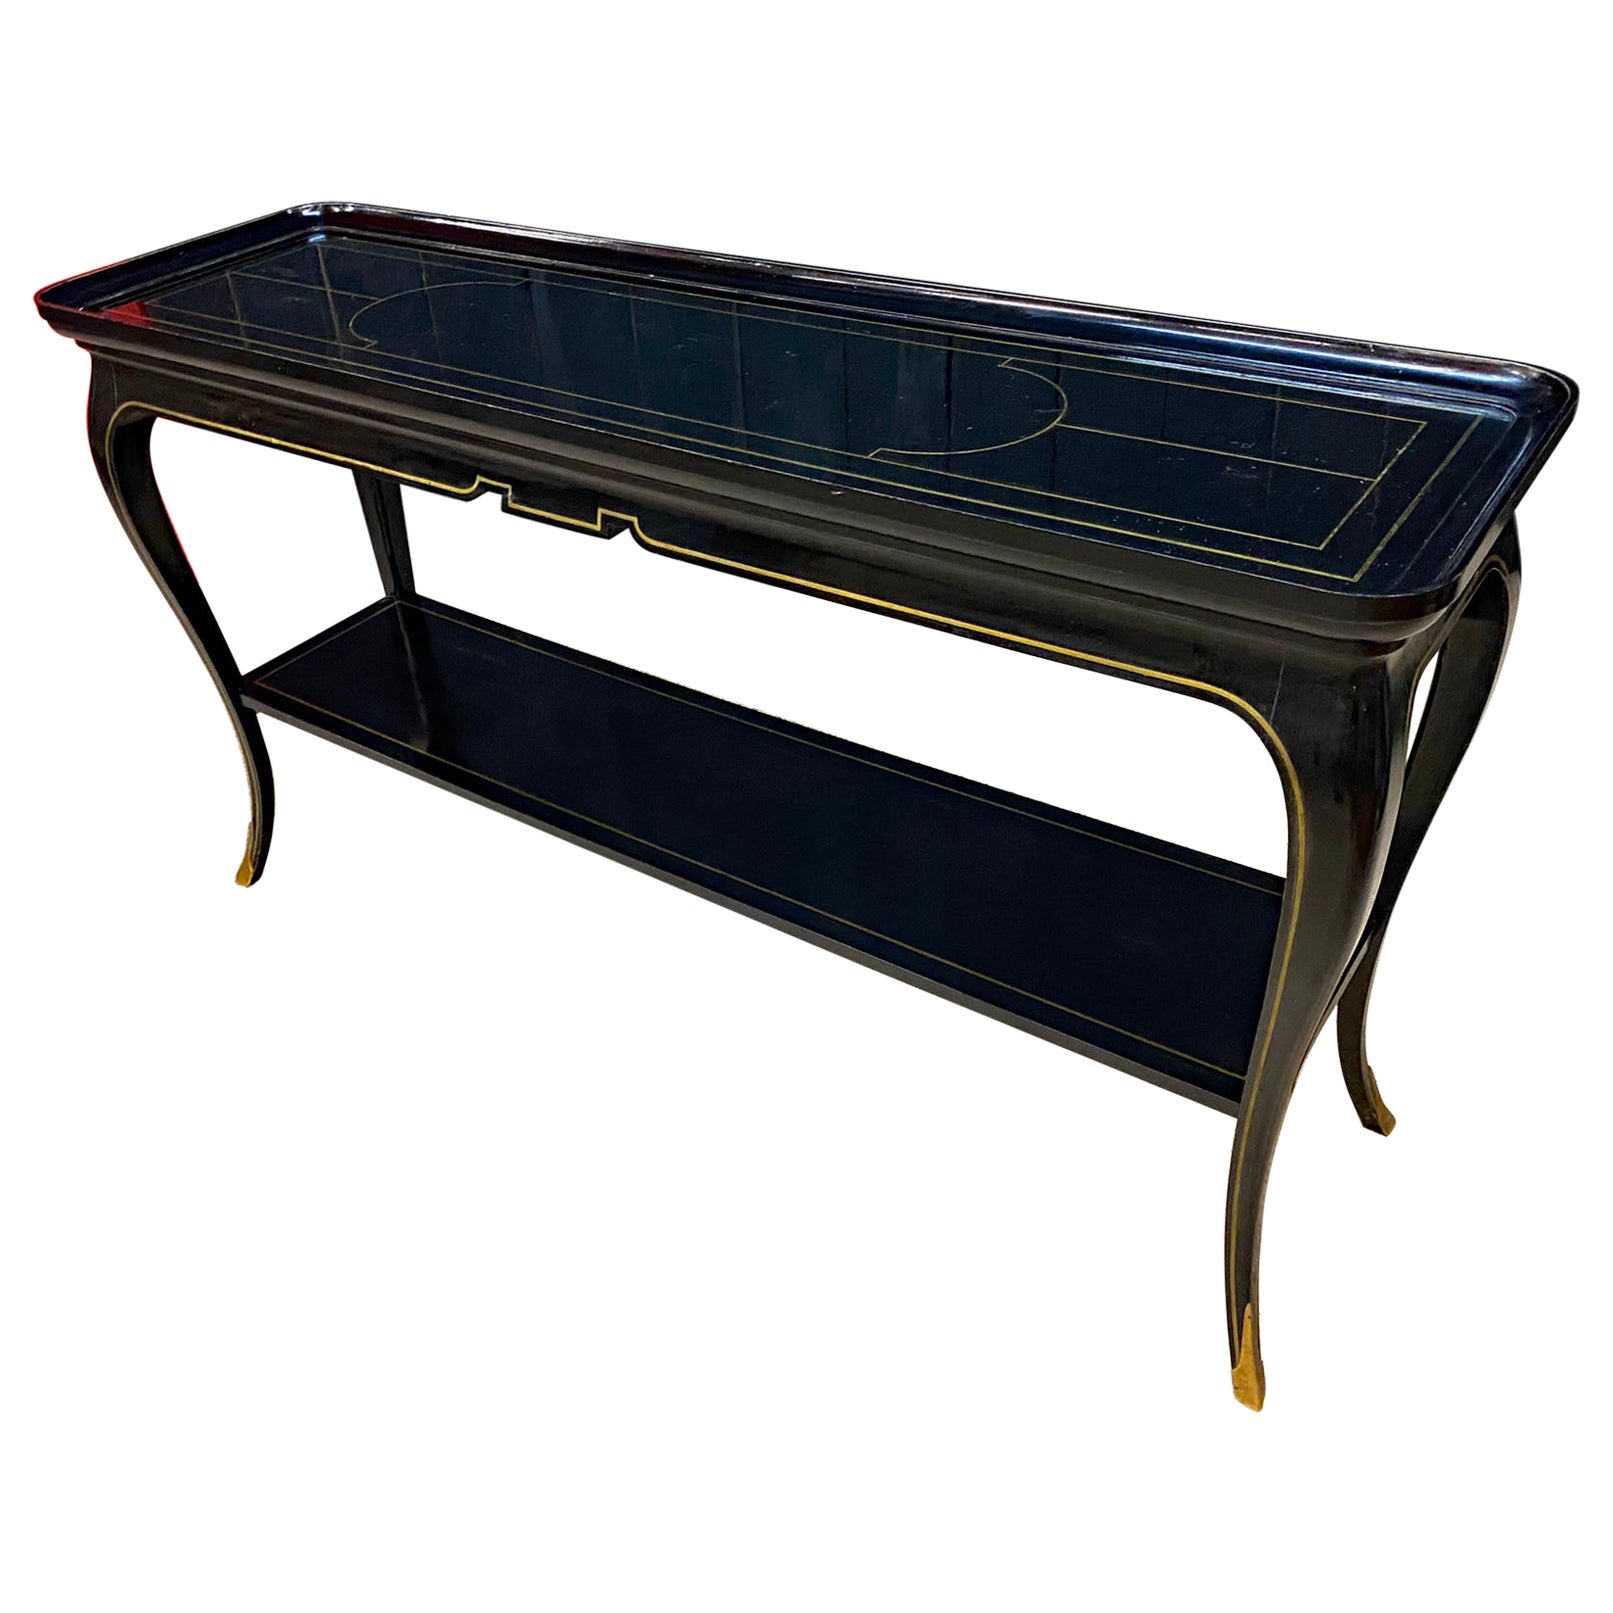 Maison Jansen, Exceptional Neo Classic Console Table circa 1950/1960 For Sale